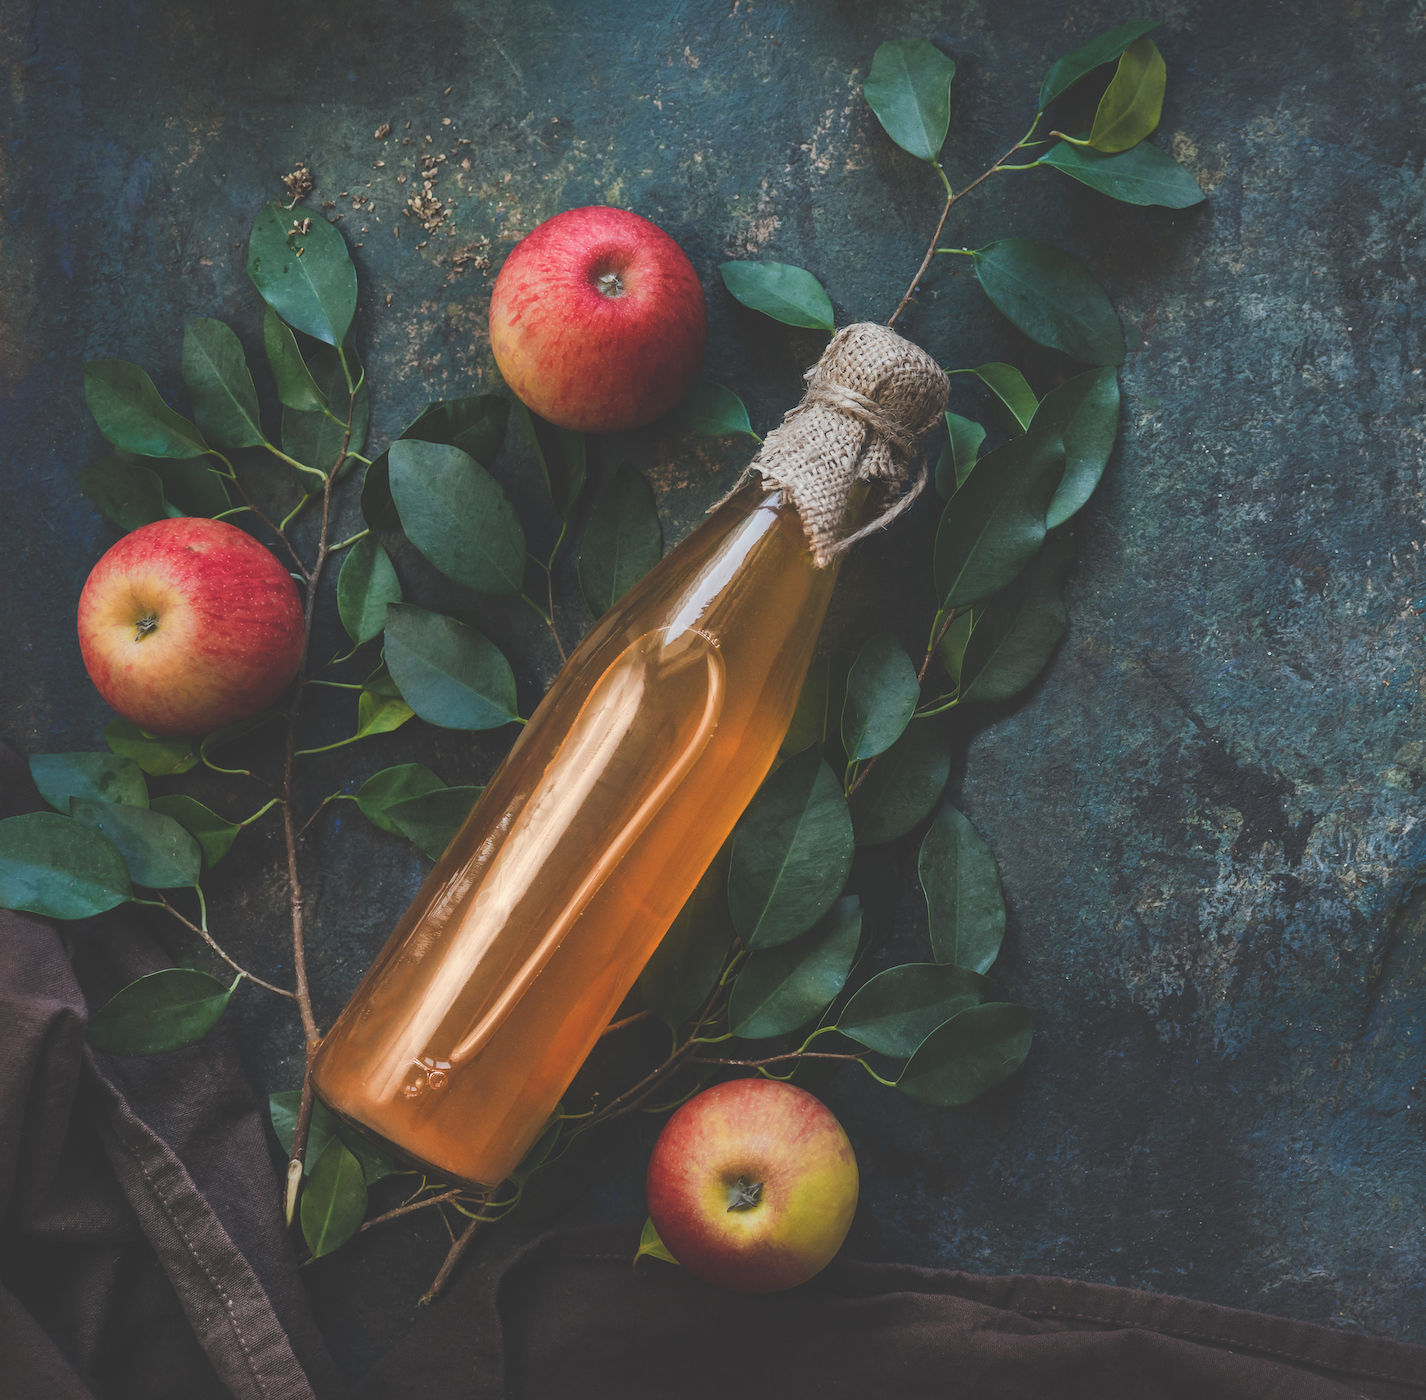 Apple cider vinegar: All the benefits and uses on skin, hair, and scalp